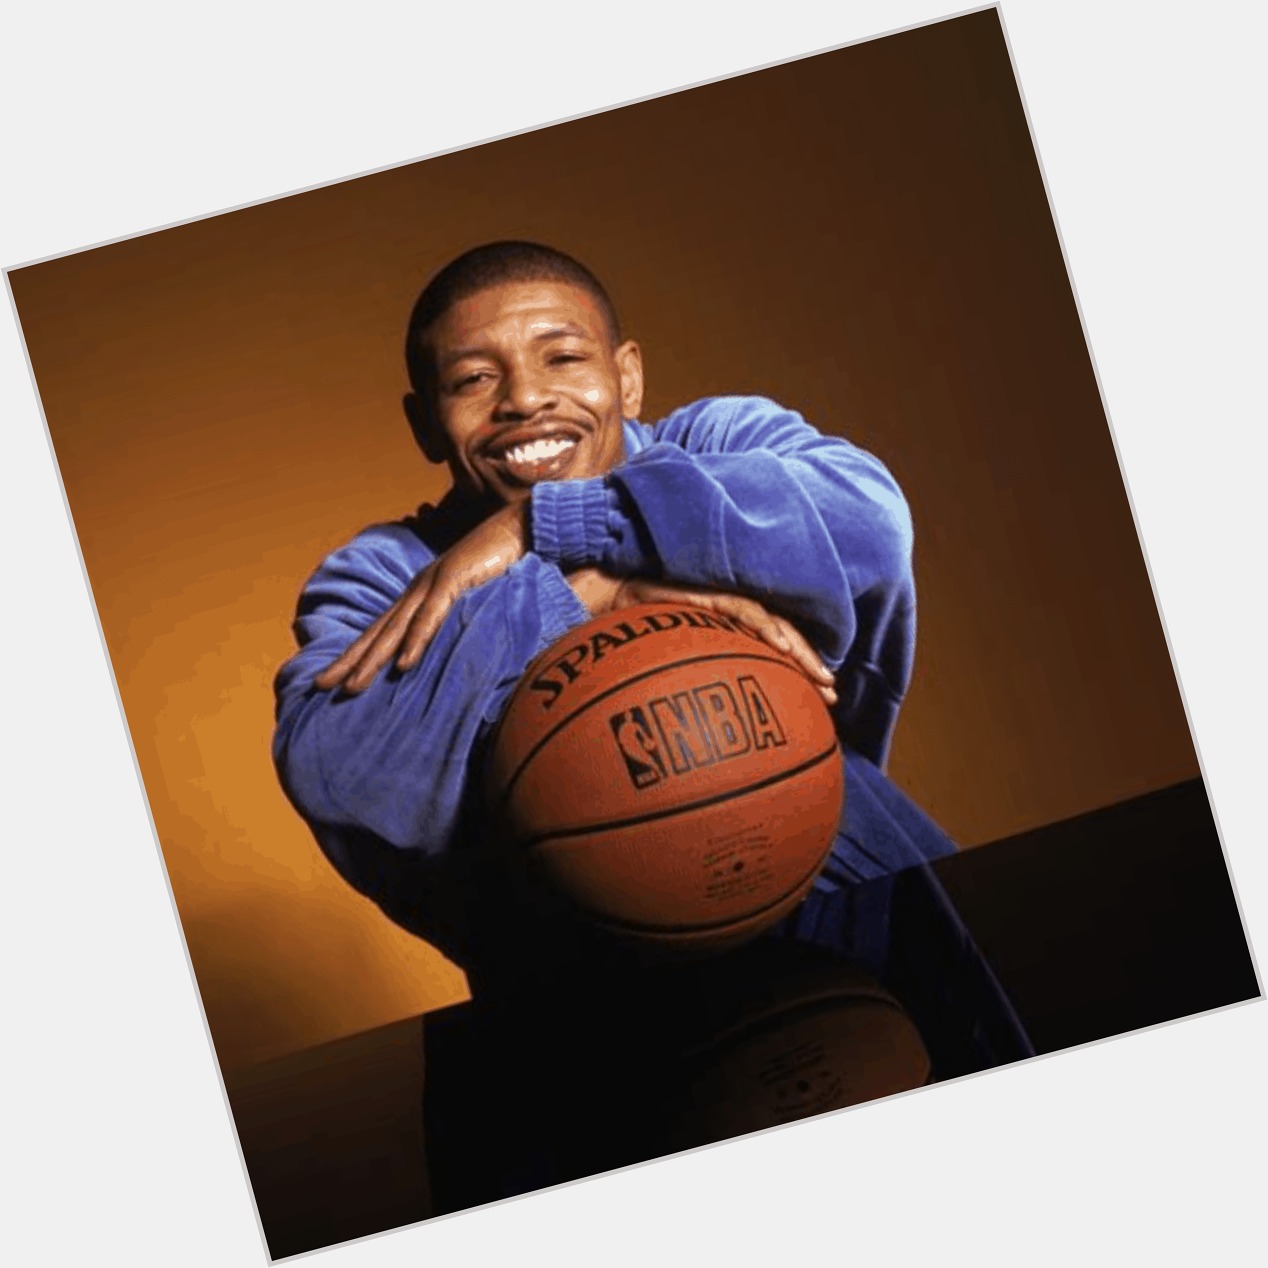 Http://fanpagepress.net/m/M/Muggsy Bogues New Pic 1